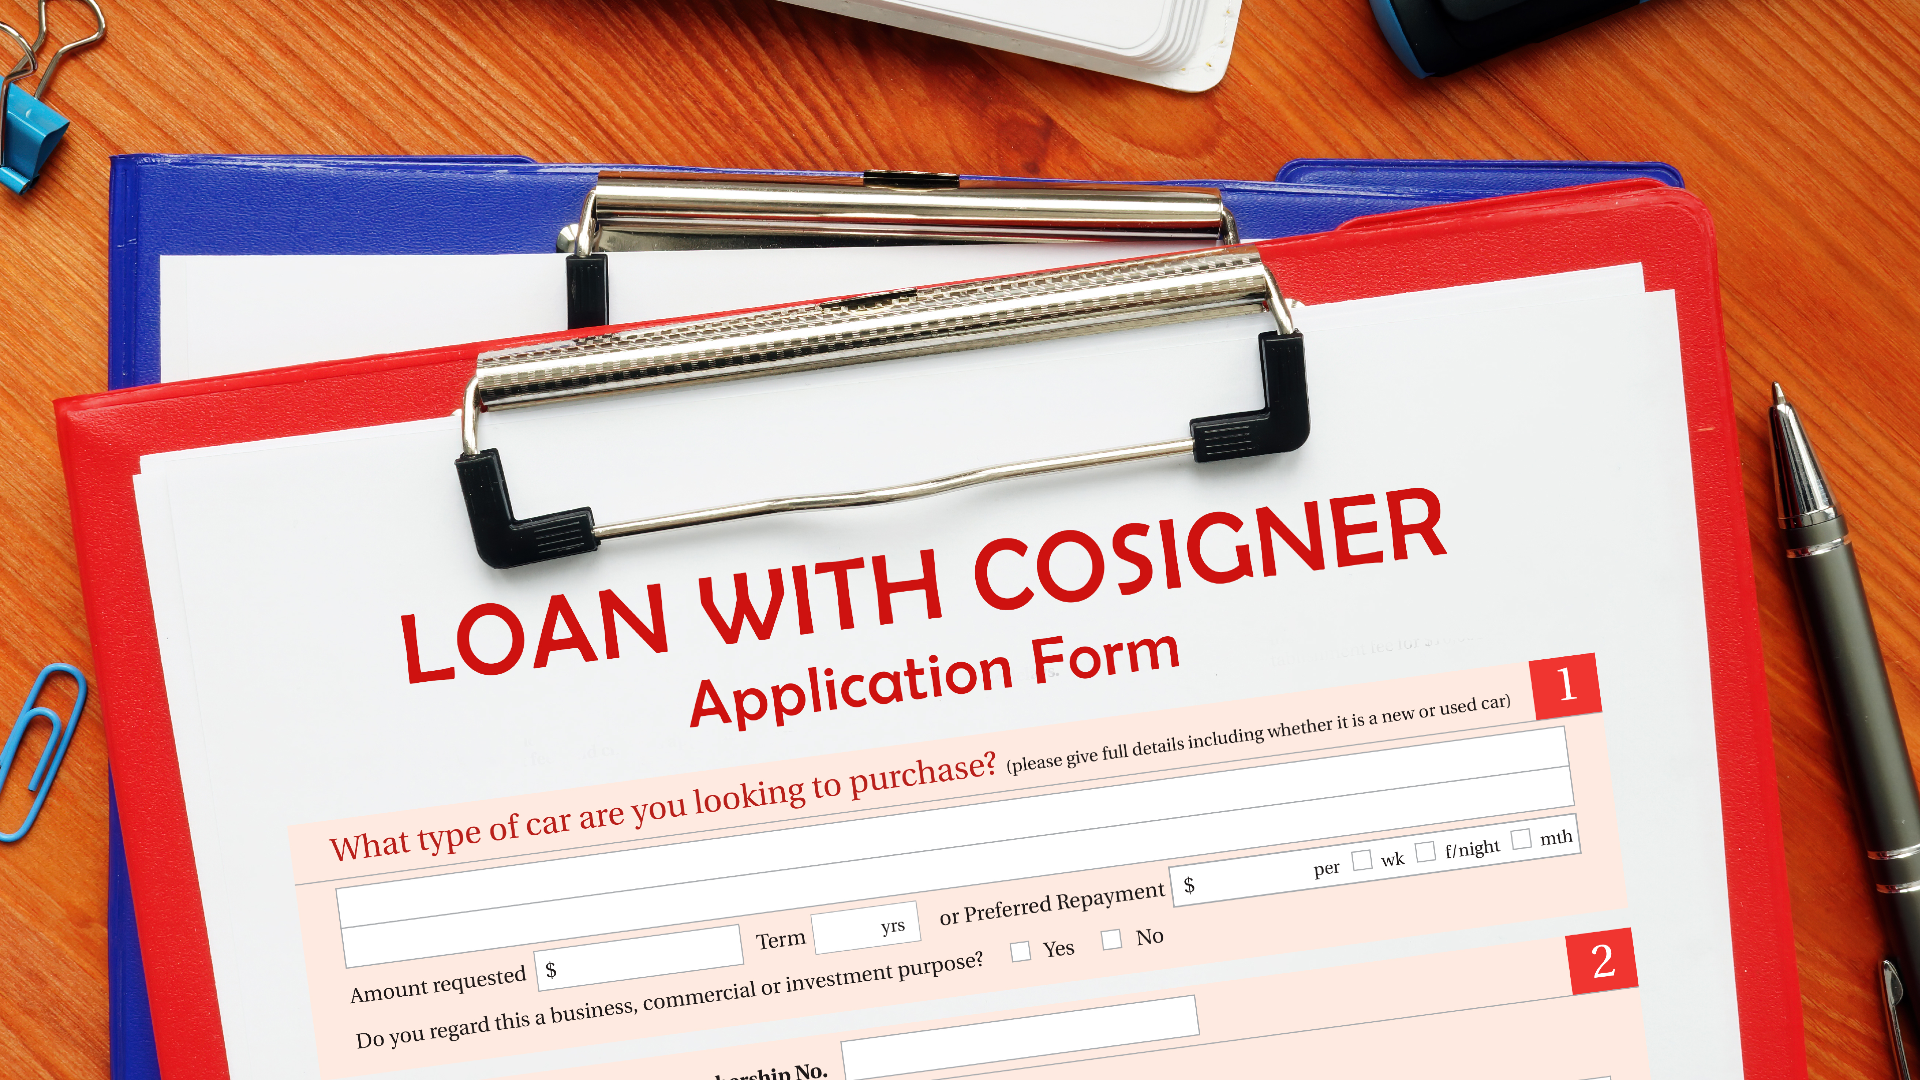 a loan with cosigner application form